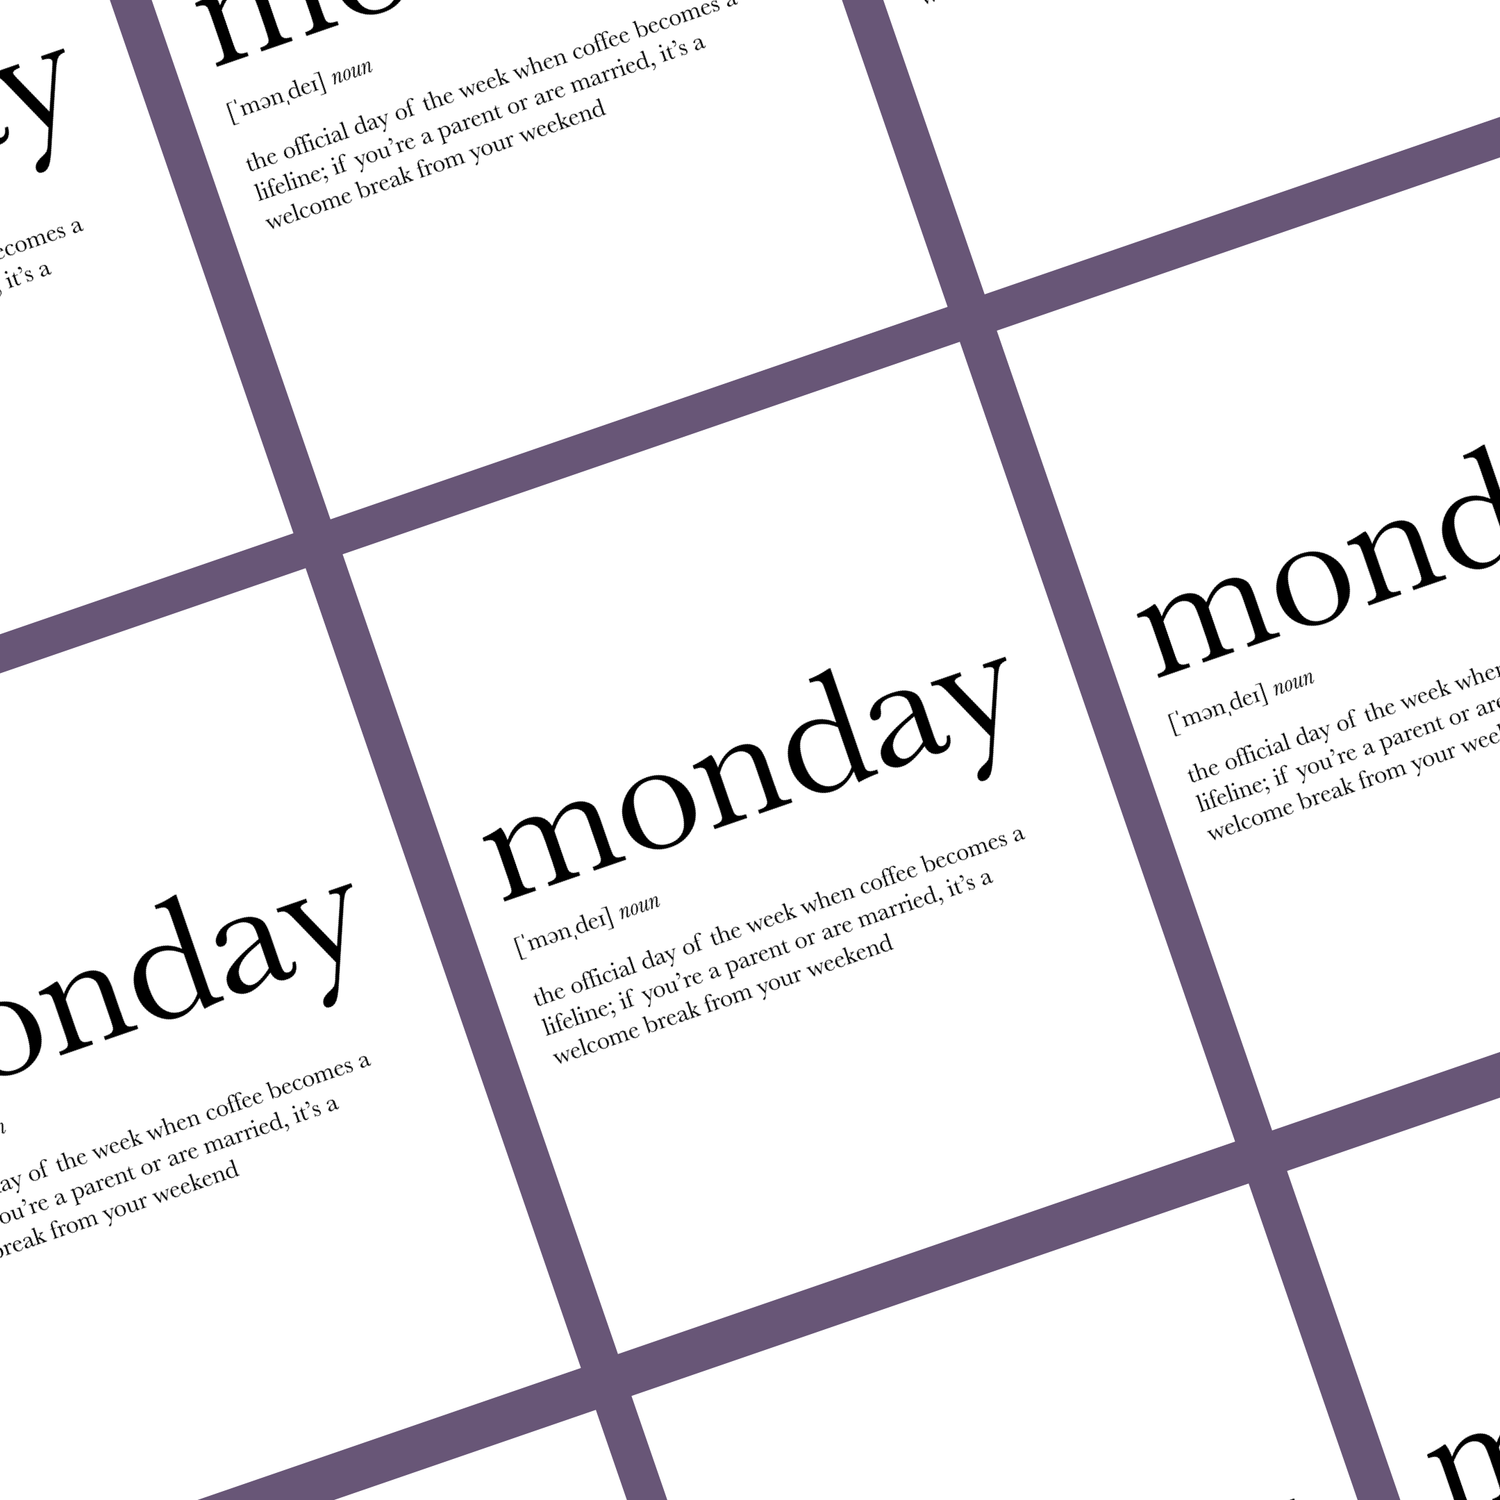 Monday Definition Everyday Greeting Card | Footnotes Paper